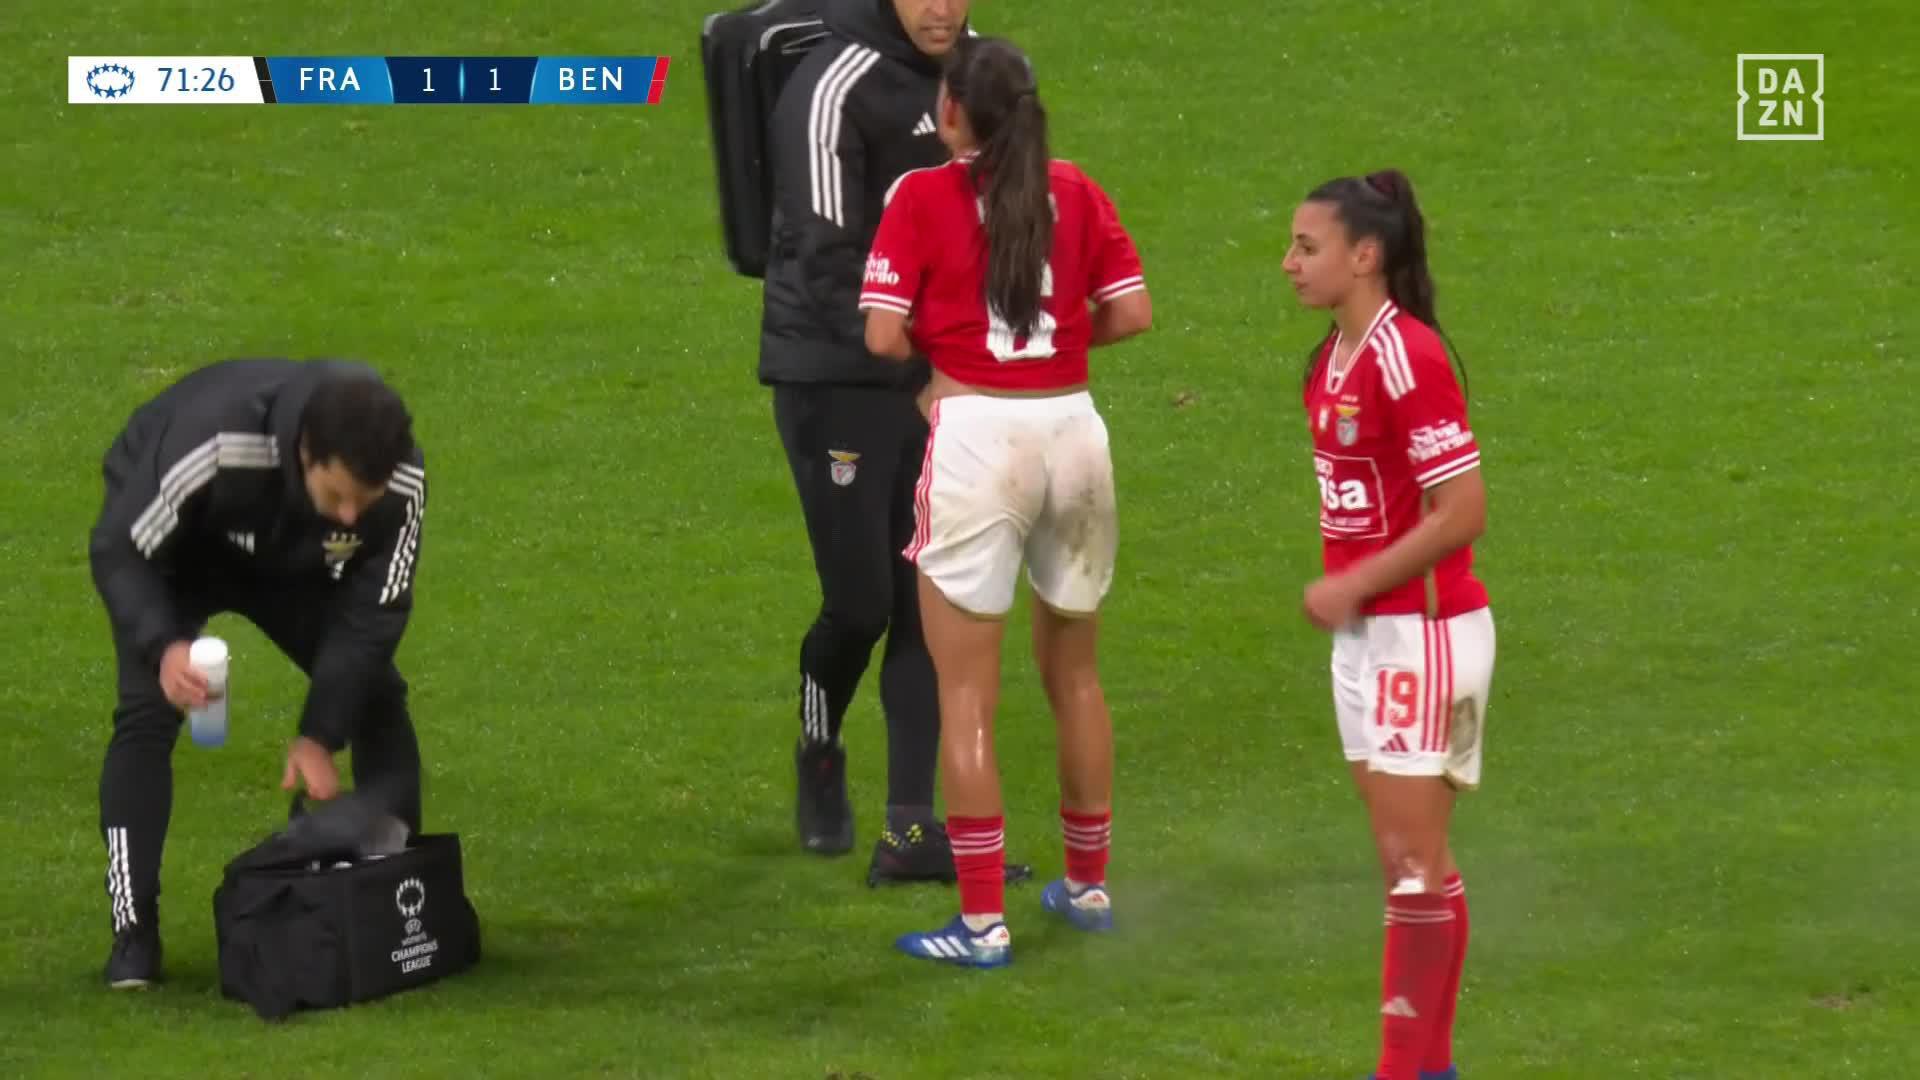 Nycole Raysla delivers off the bench for Benfica 💥🏴󠁧󠁢󠁥󠁮󠁧󠁿 🎙️ 👉  🎙️ 👉  🎙️ 👉  #UWCLonDAZN